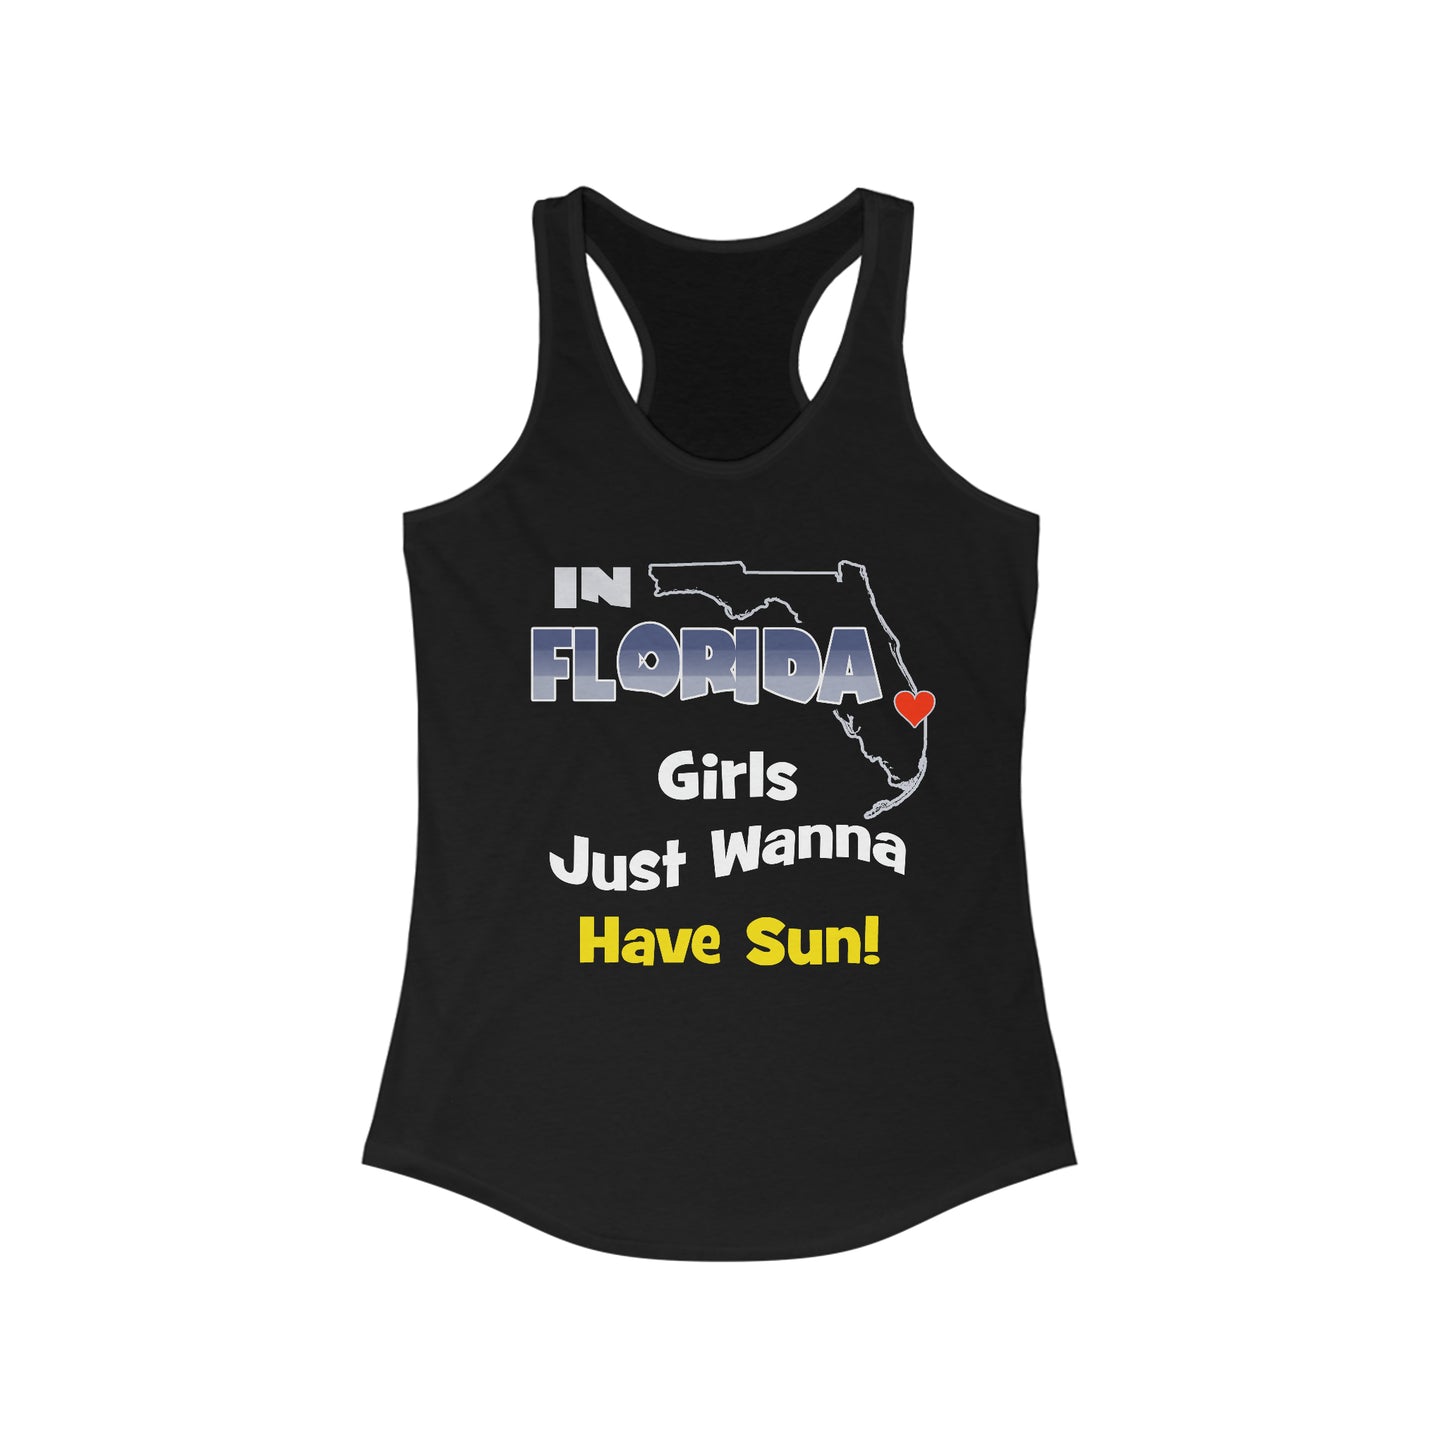 Florida Girls Have Fun - Tank Tops For You